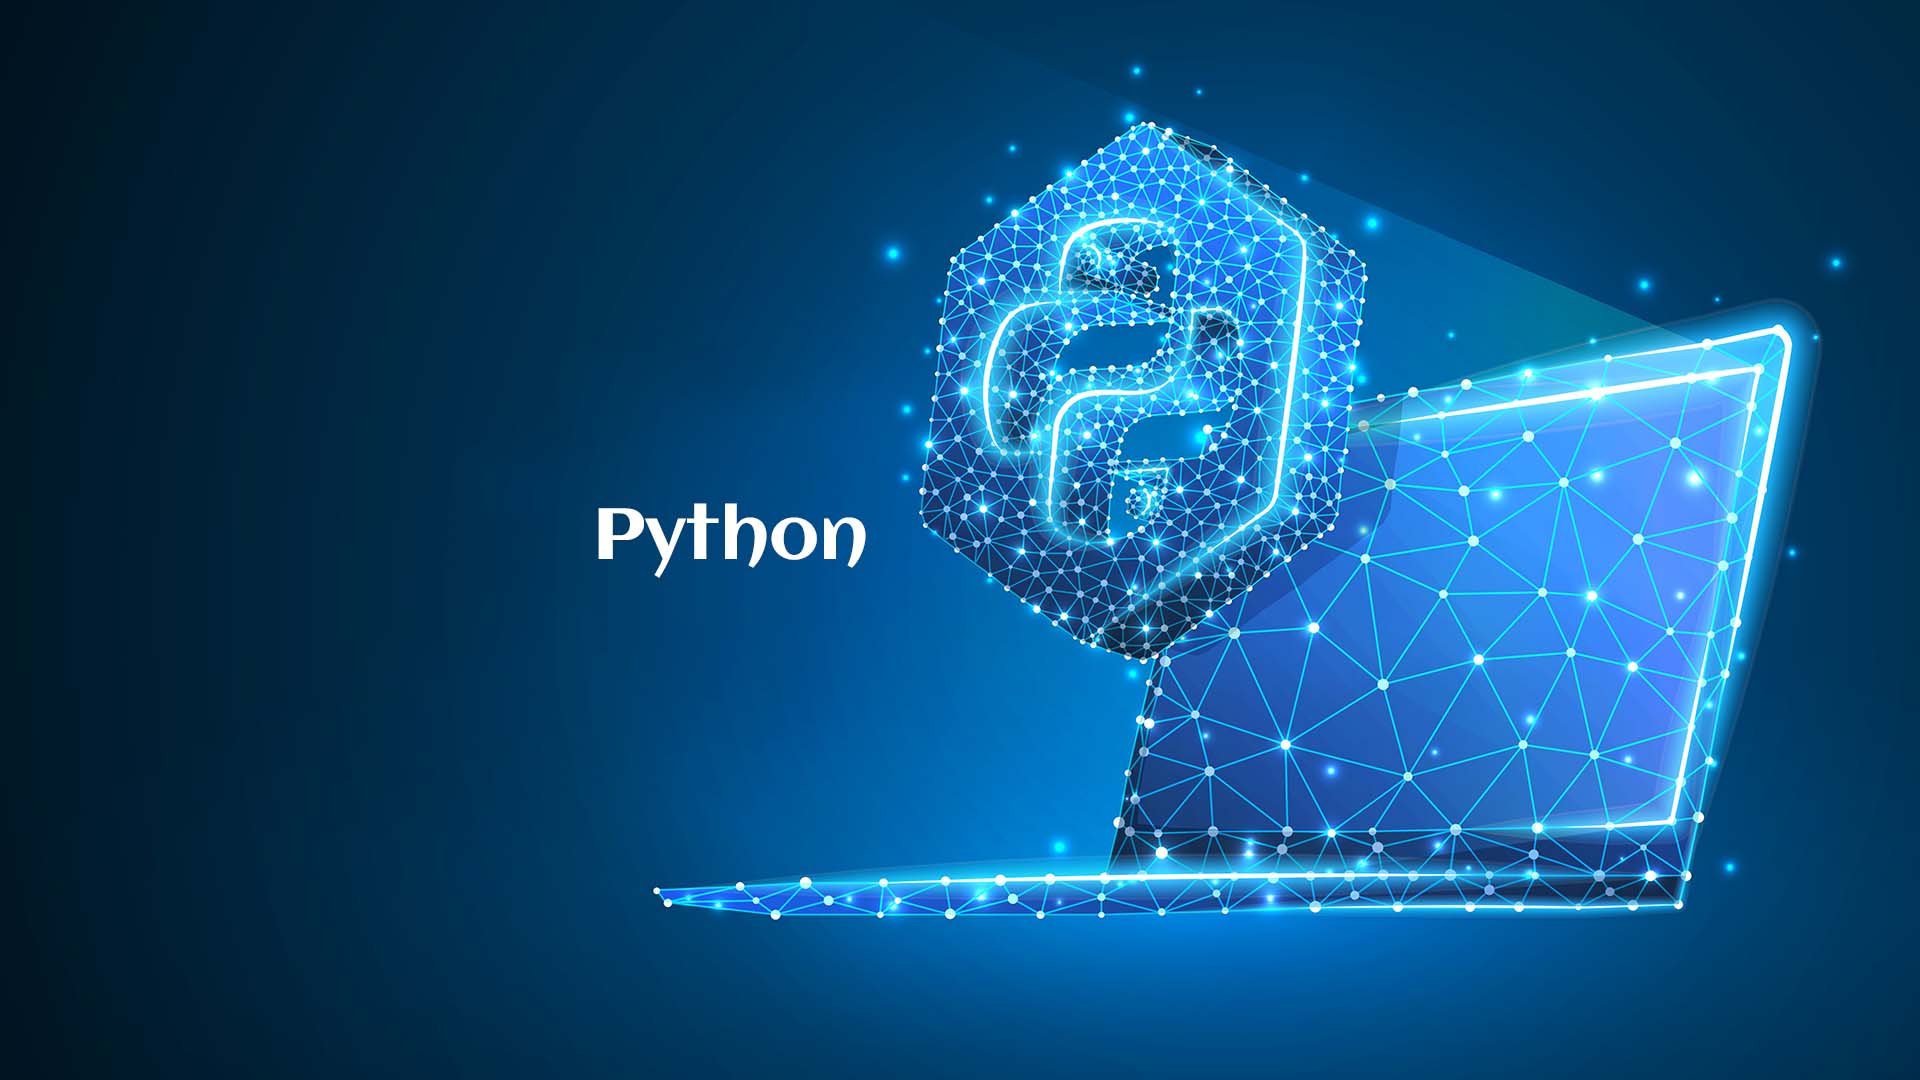 We Endorse Learning Python as Your First Programming Language for Its Practicality